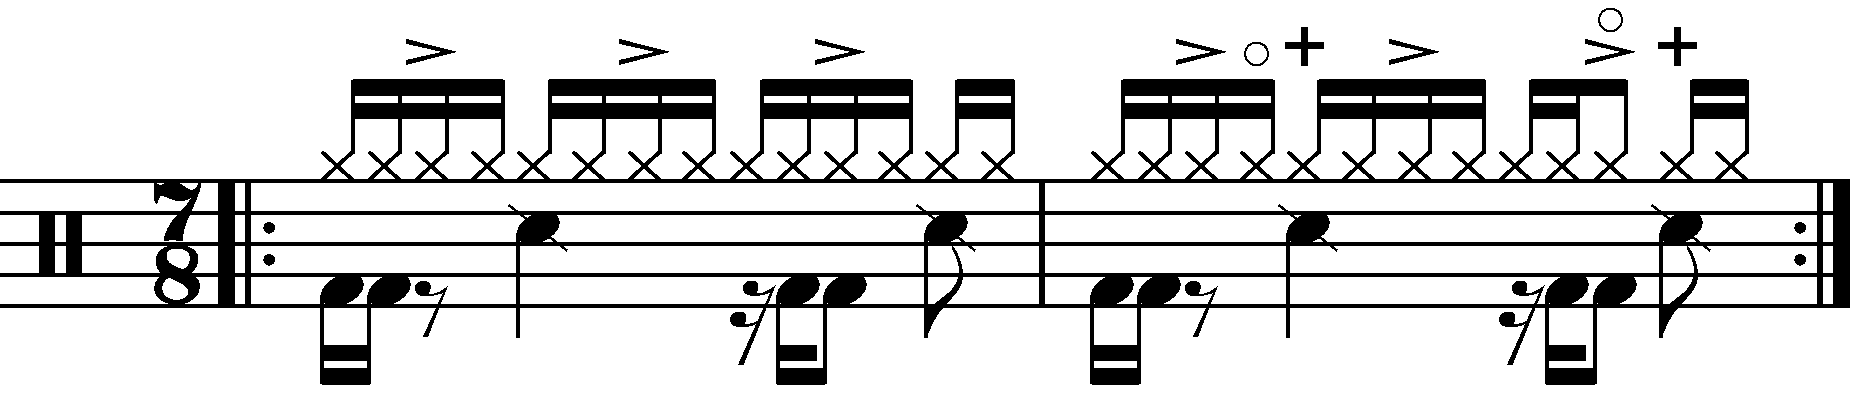 A two bar simple 7/8 groove